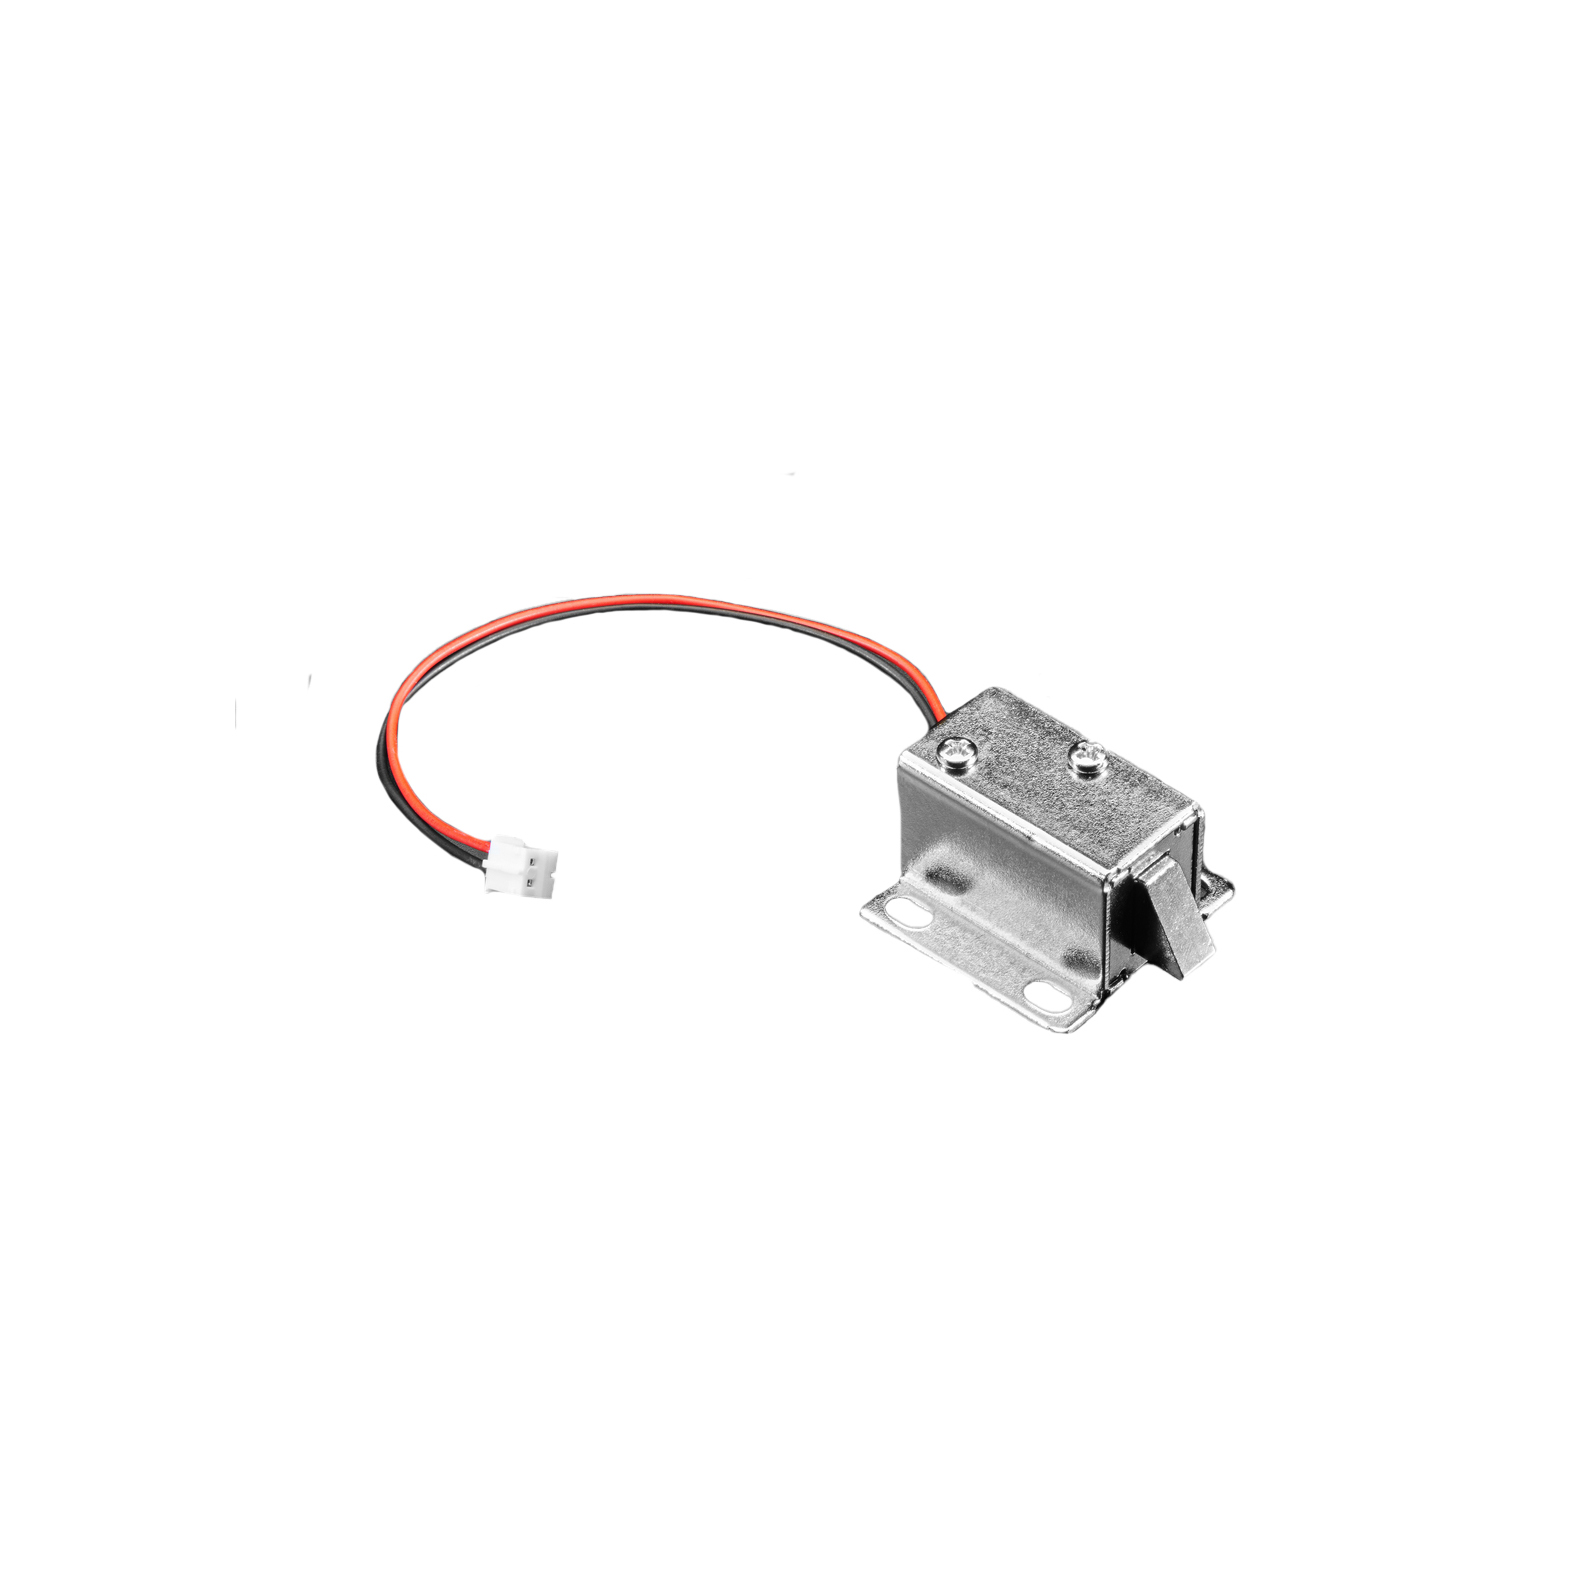 【5065】SMALL LOCK-STYLE SOLENOID - 12VD